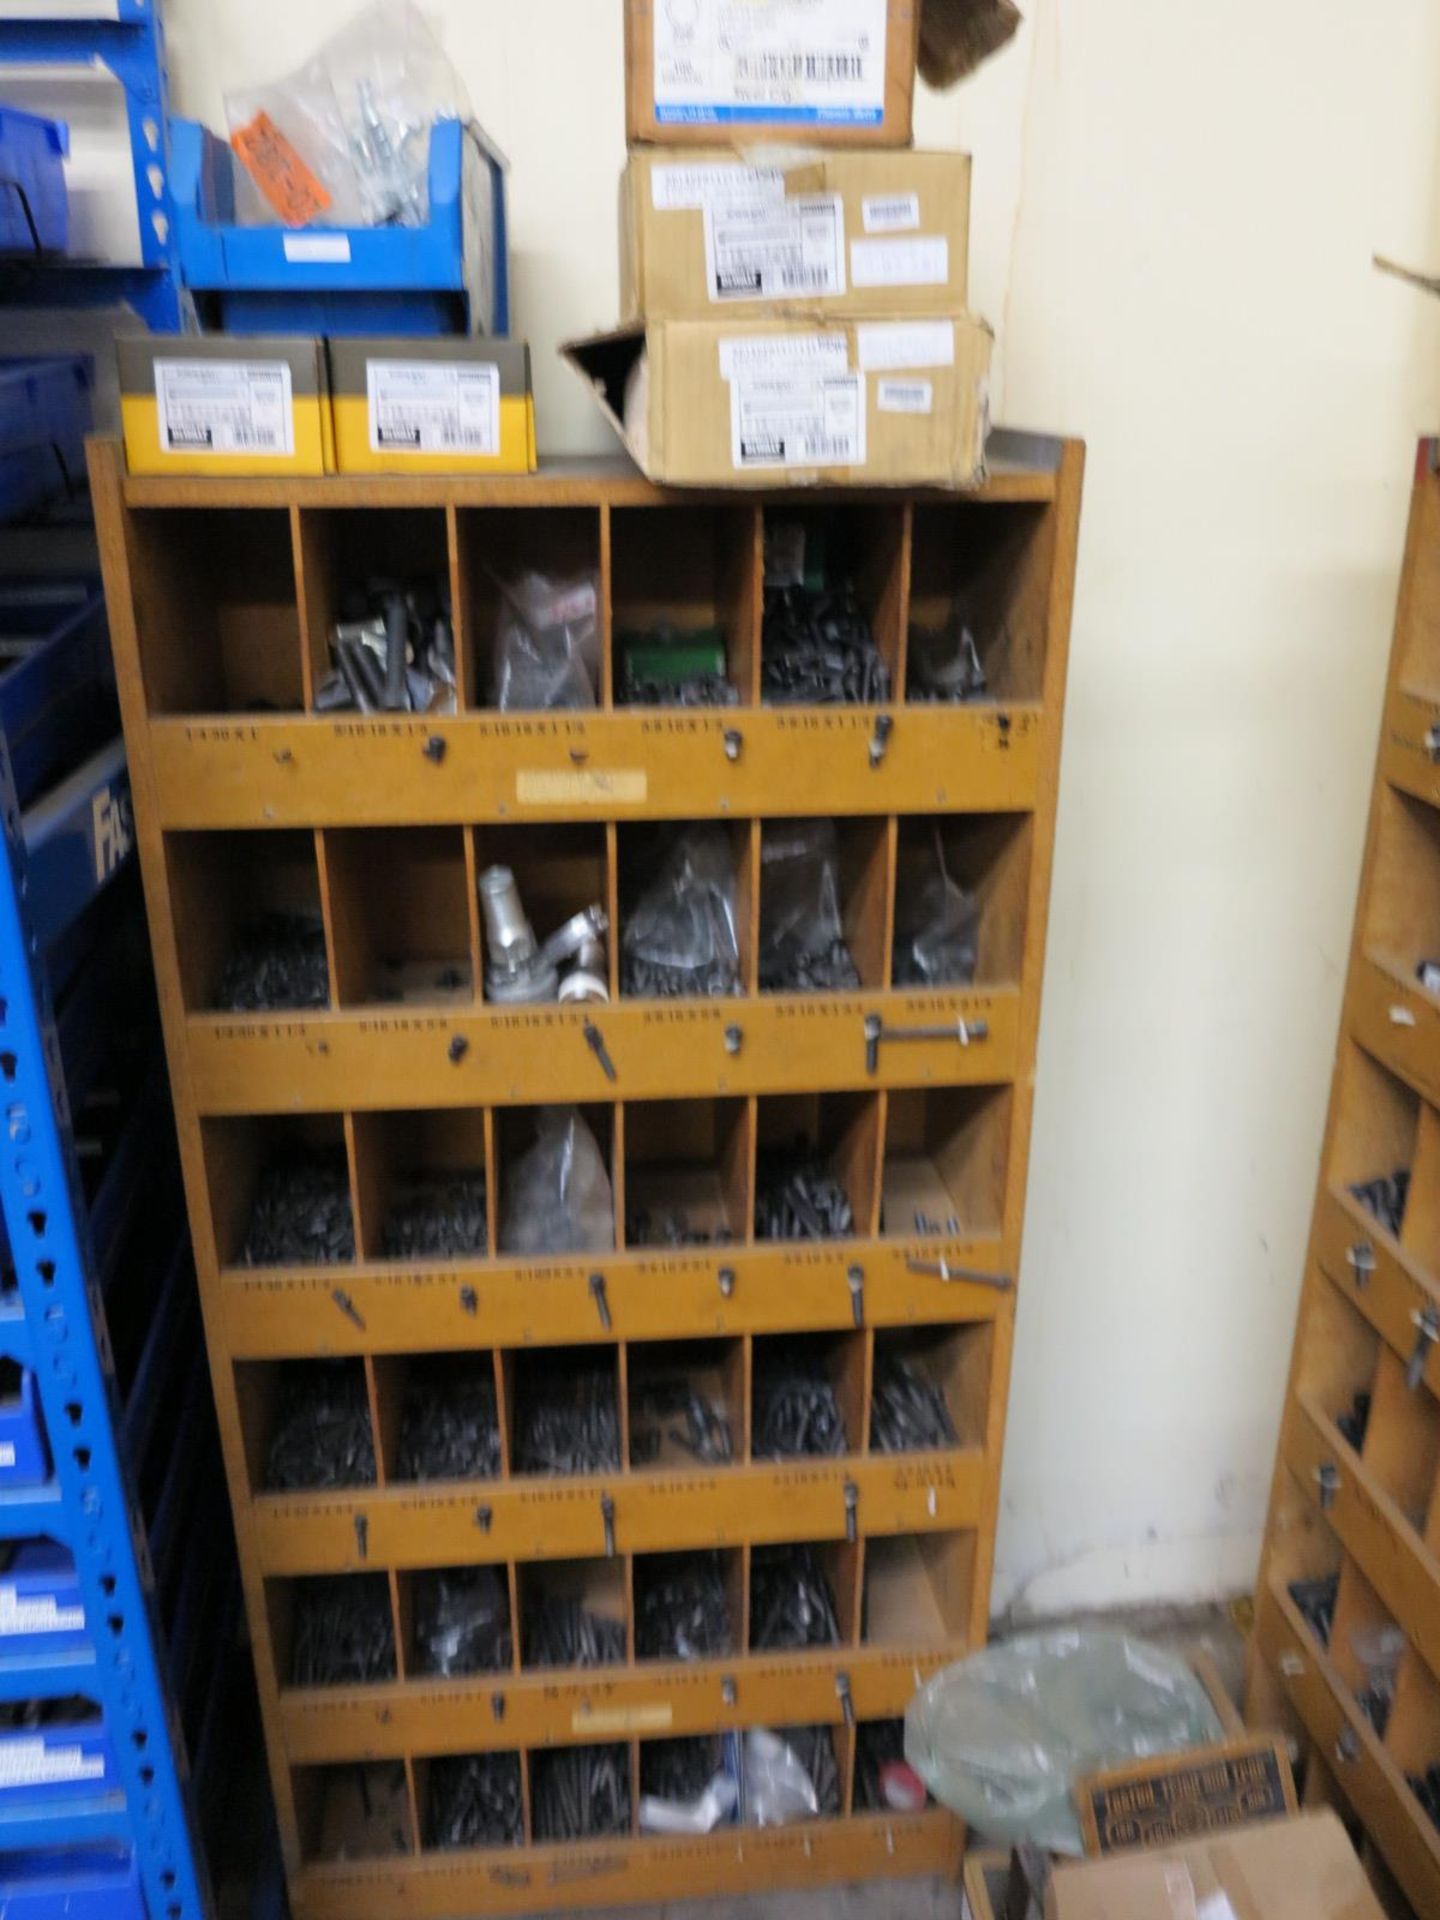 LOT - (3) 28" X 12" X 5'HT FASTENER STORAGE UNITS, W/ CONTENTS OF FASTENERS, PLUS ALL THE FULL AND